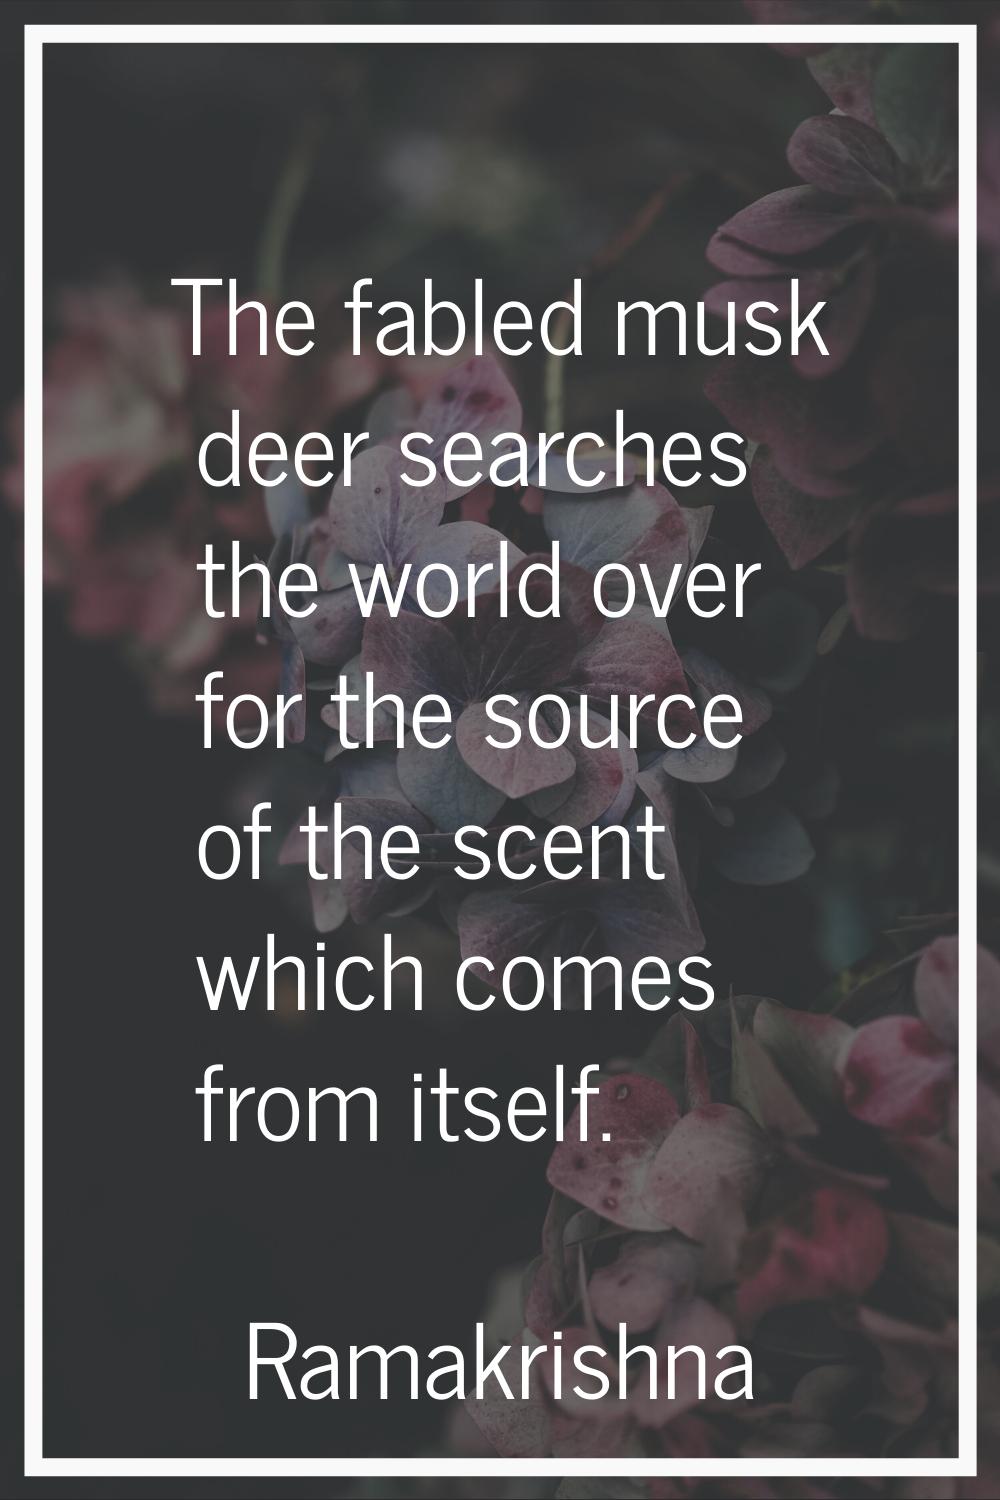 The fabled musk deer searches the world over for the source of the scent which comes from itself.